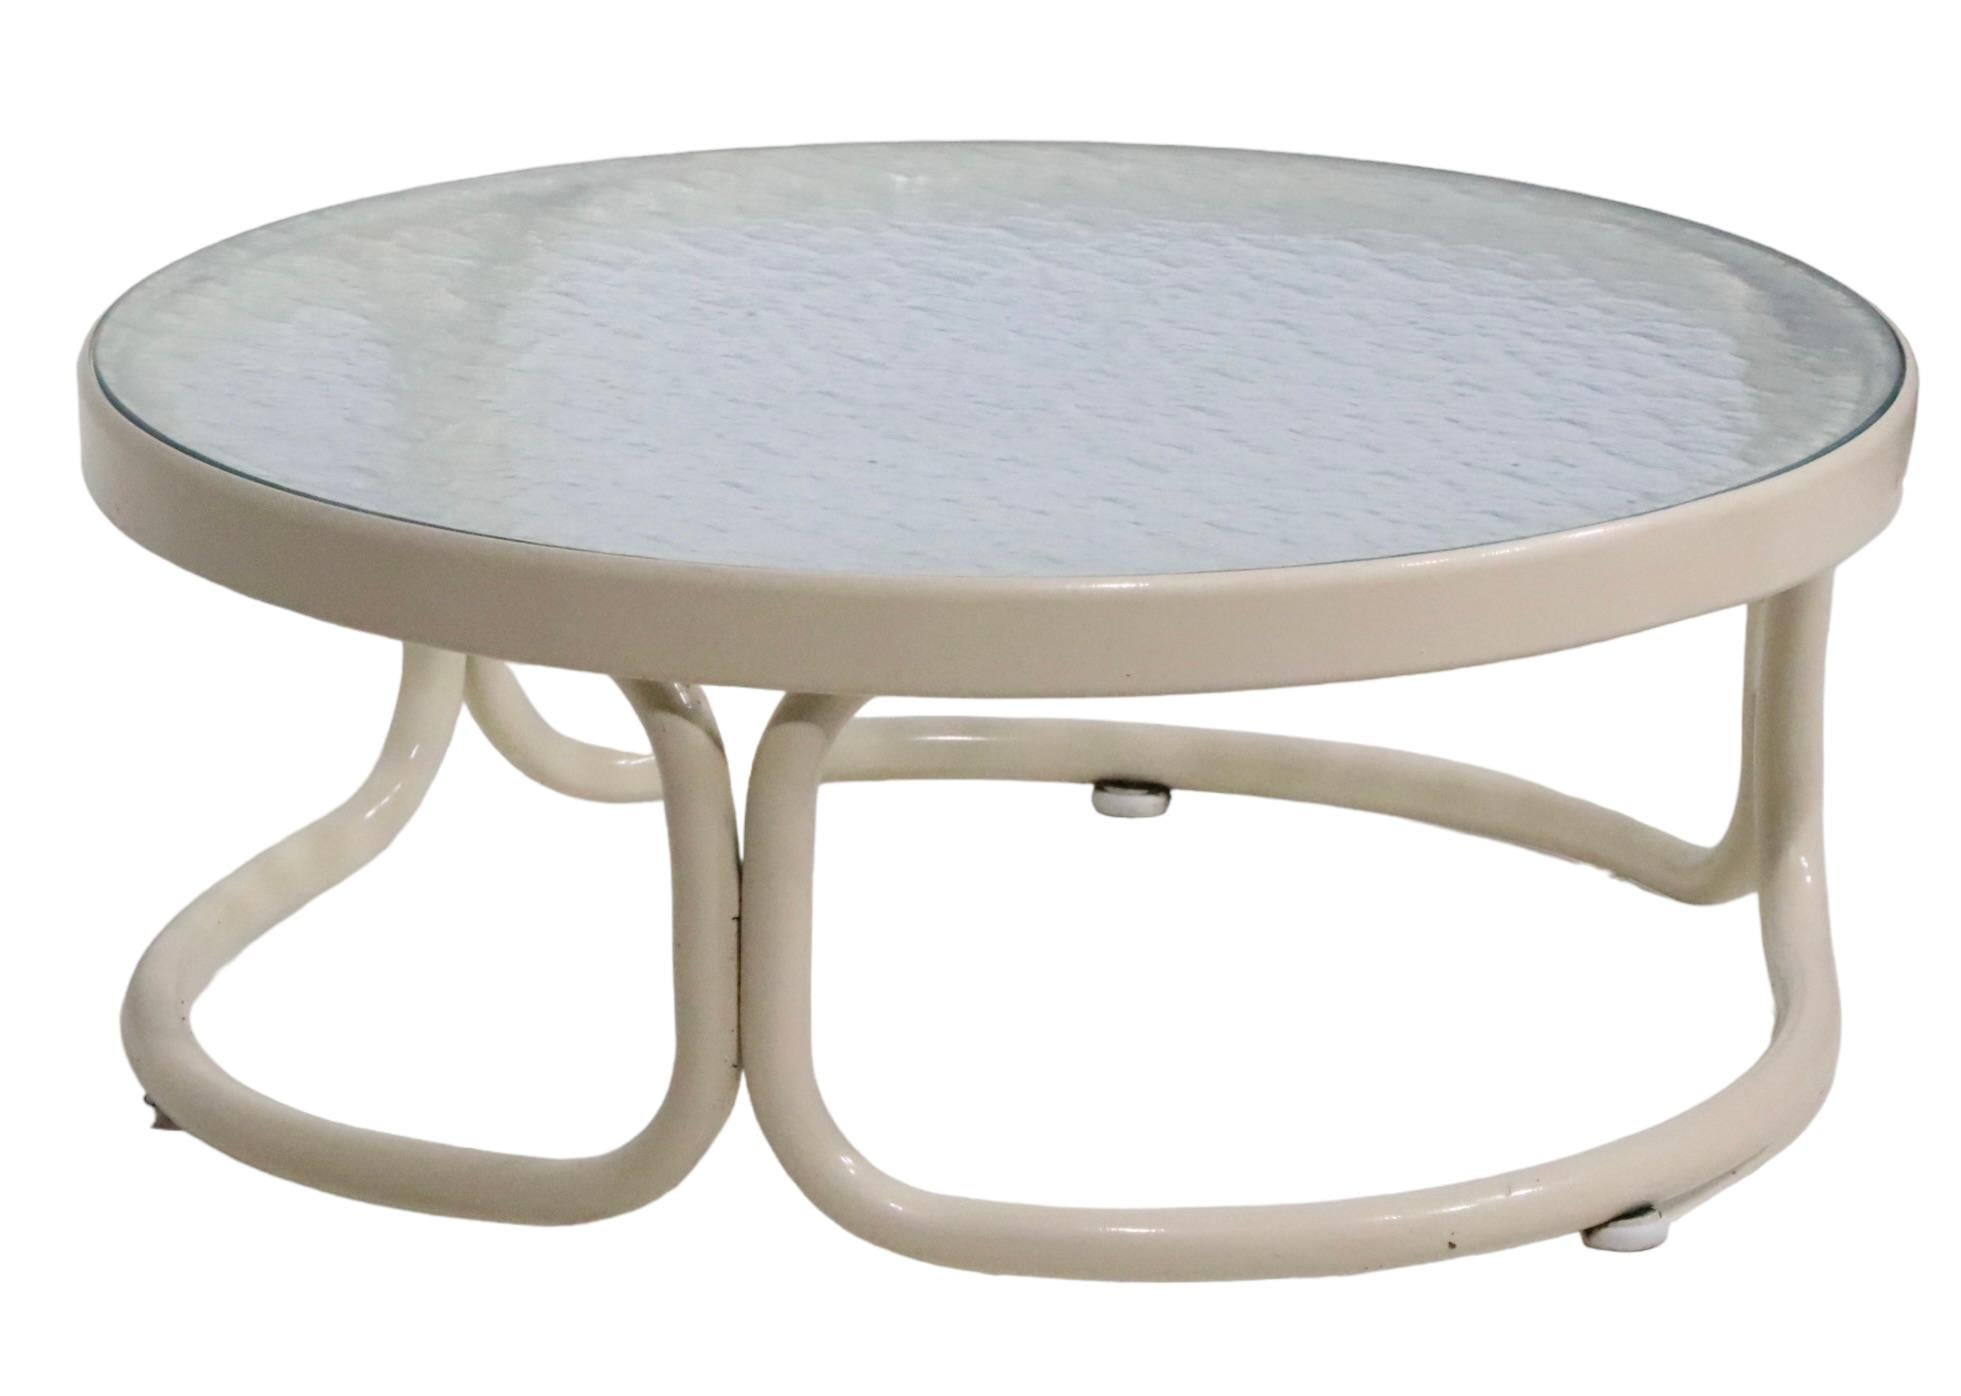 American Vintage Poolside Patio Side Table with Aluminum Frame and Textured Glass Top For Sale